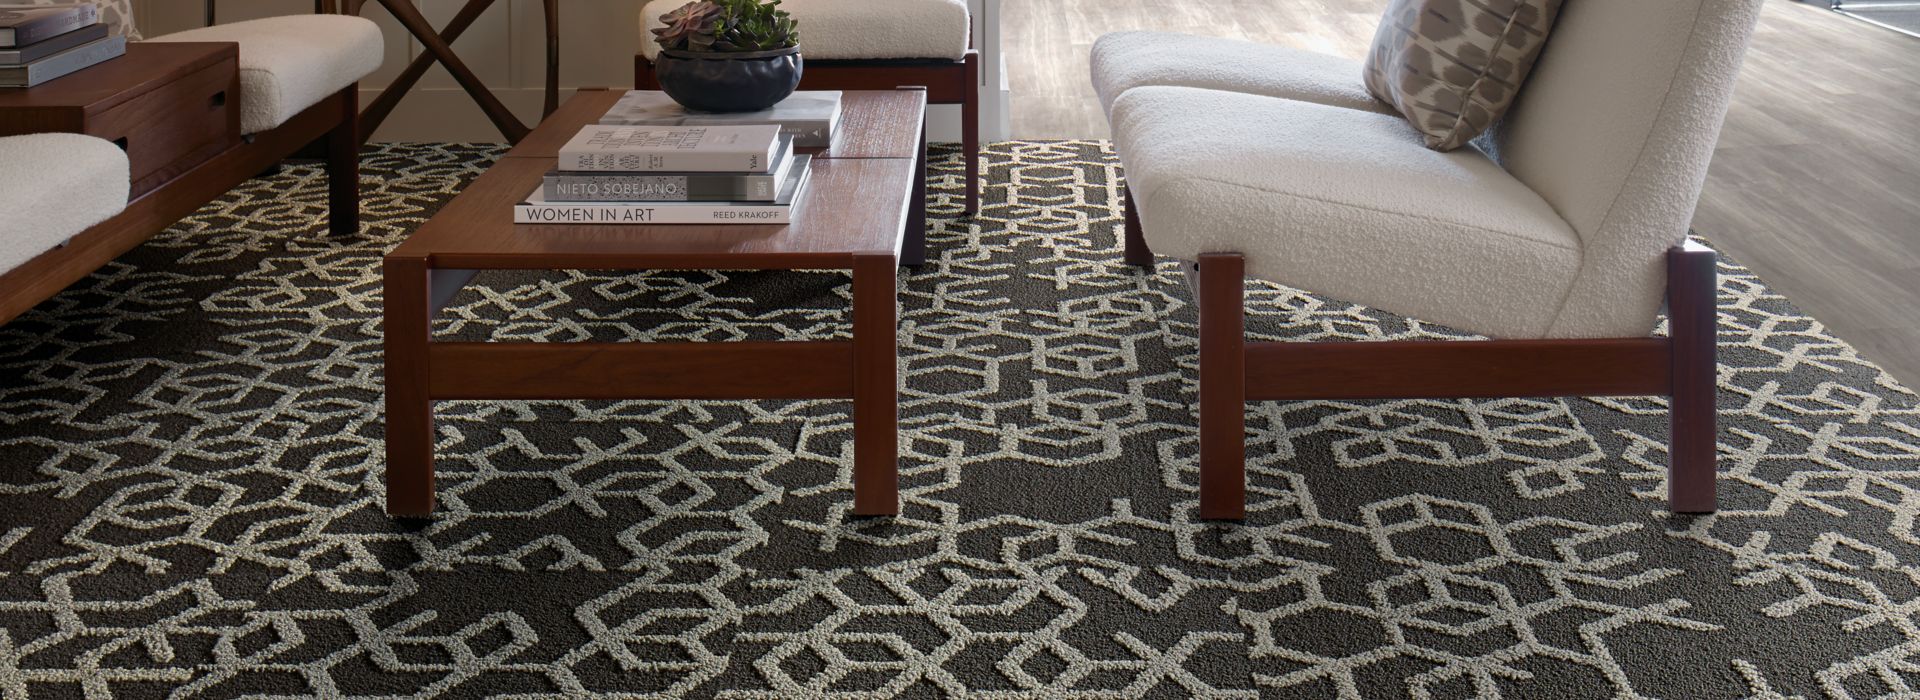 Interface Bee's Knees carpet tile and LVT in seating area